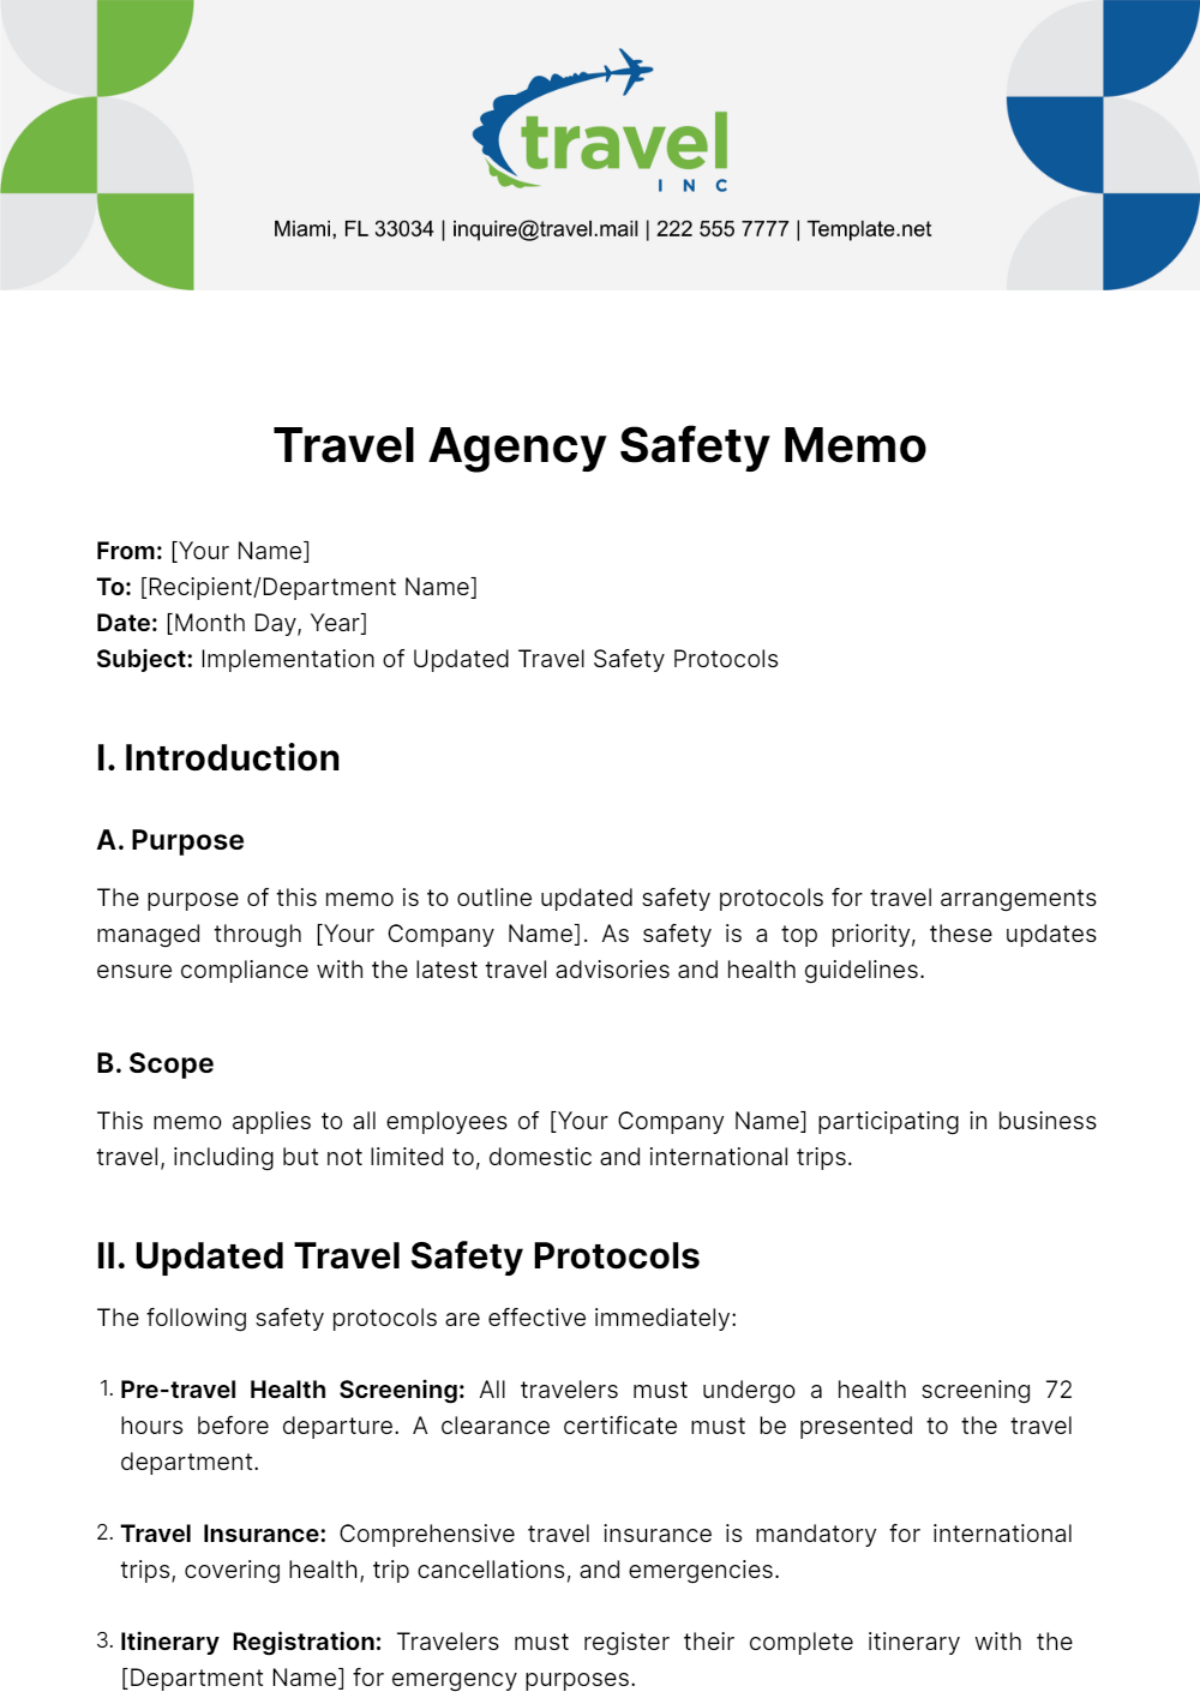 Travel Agency Safety Memo Template